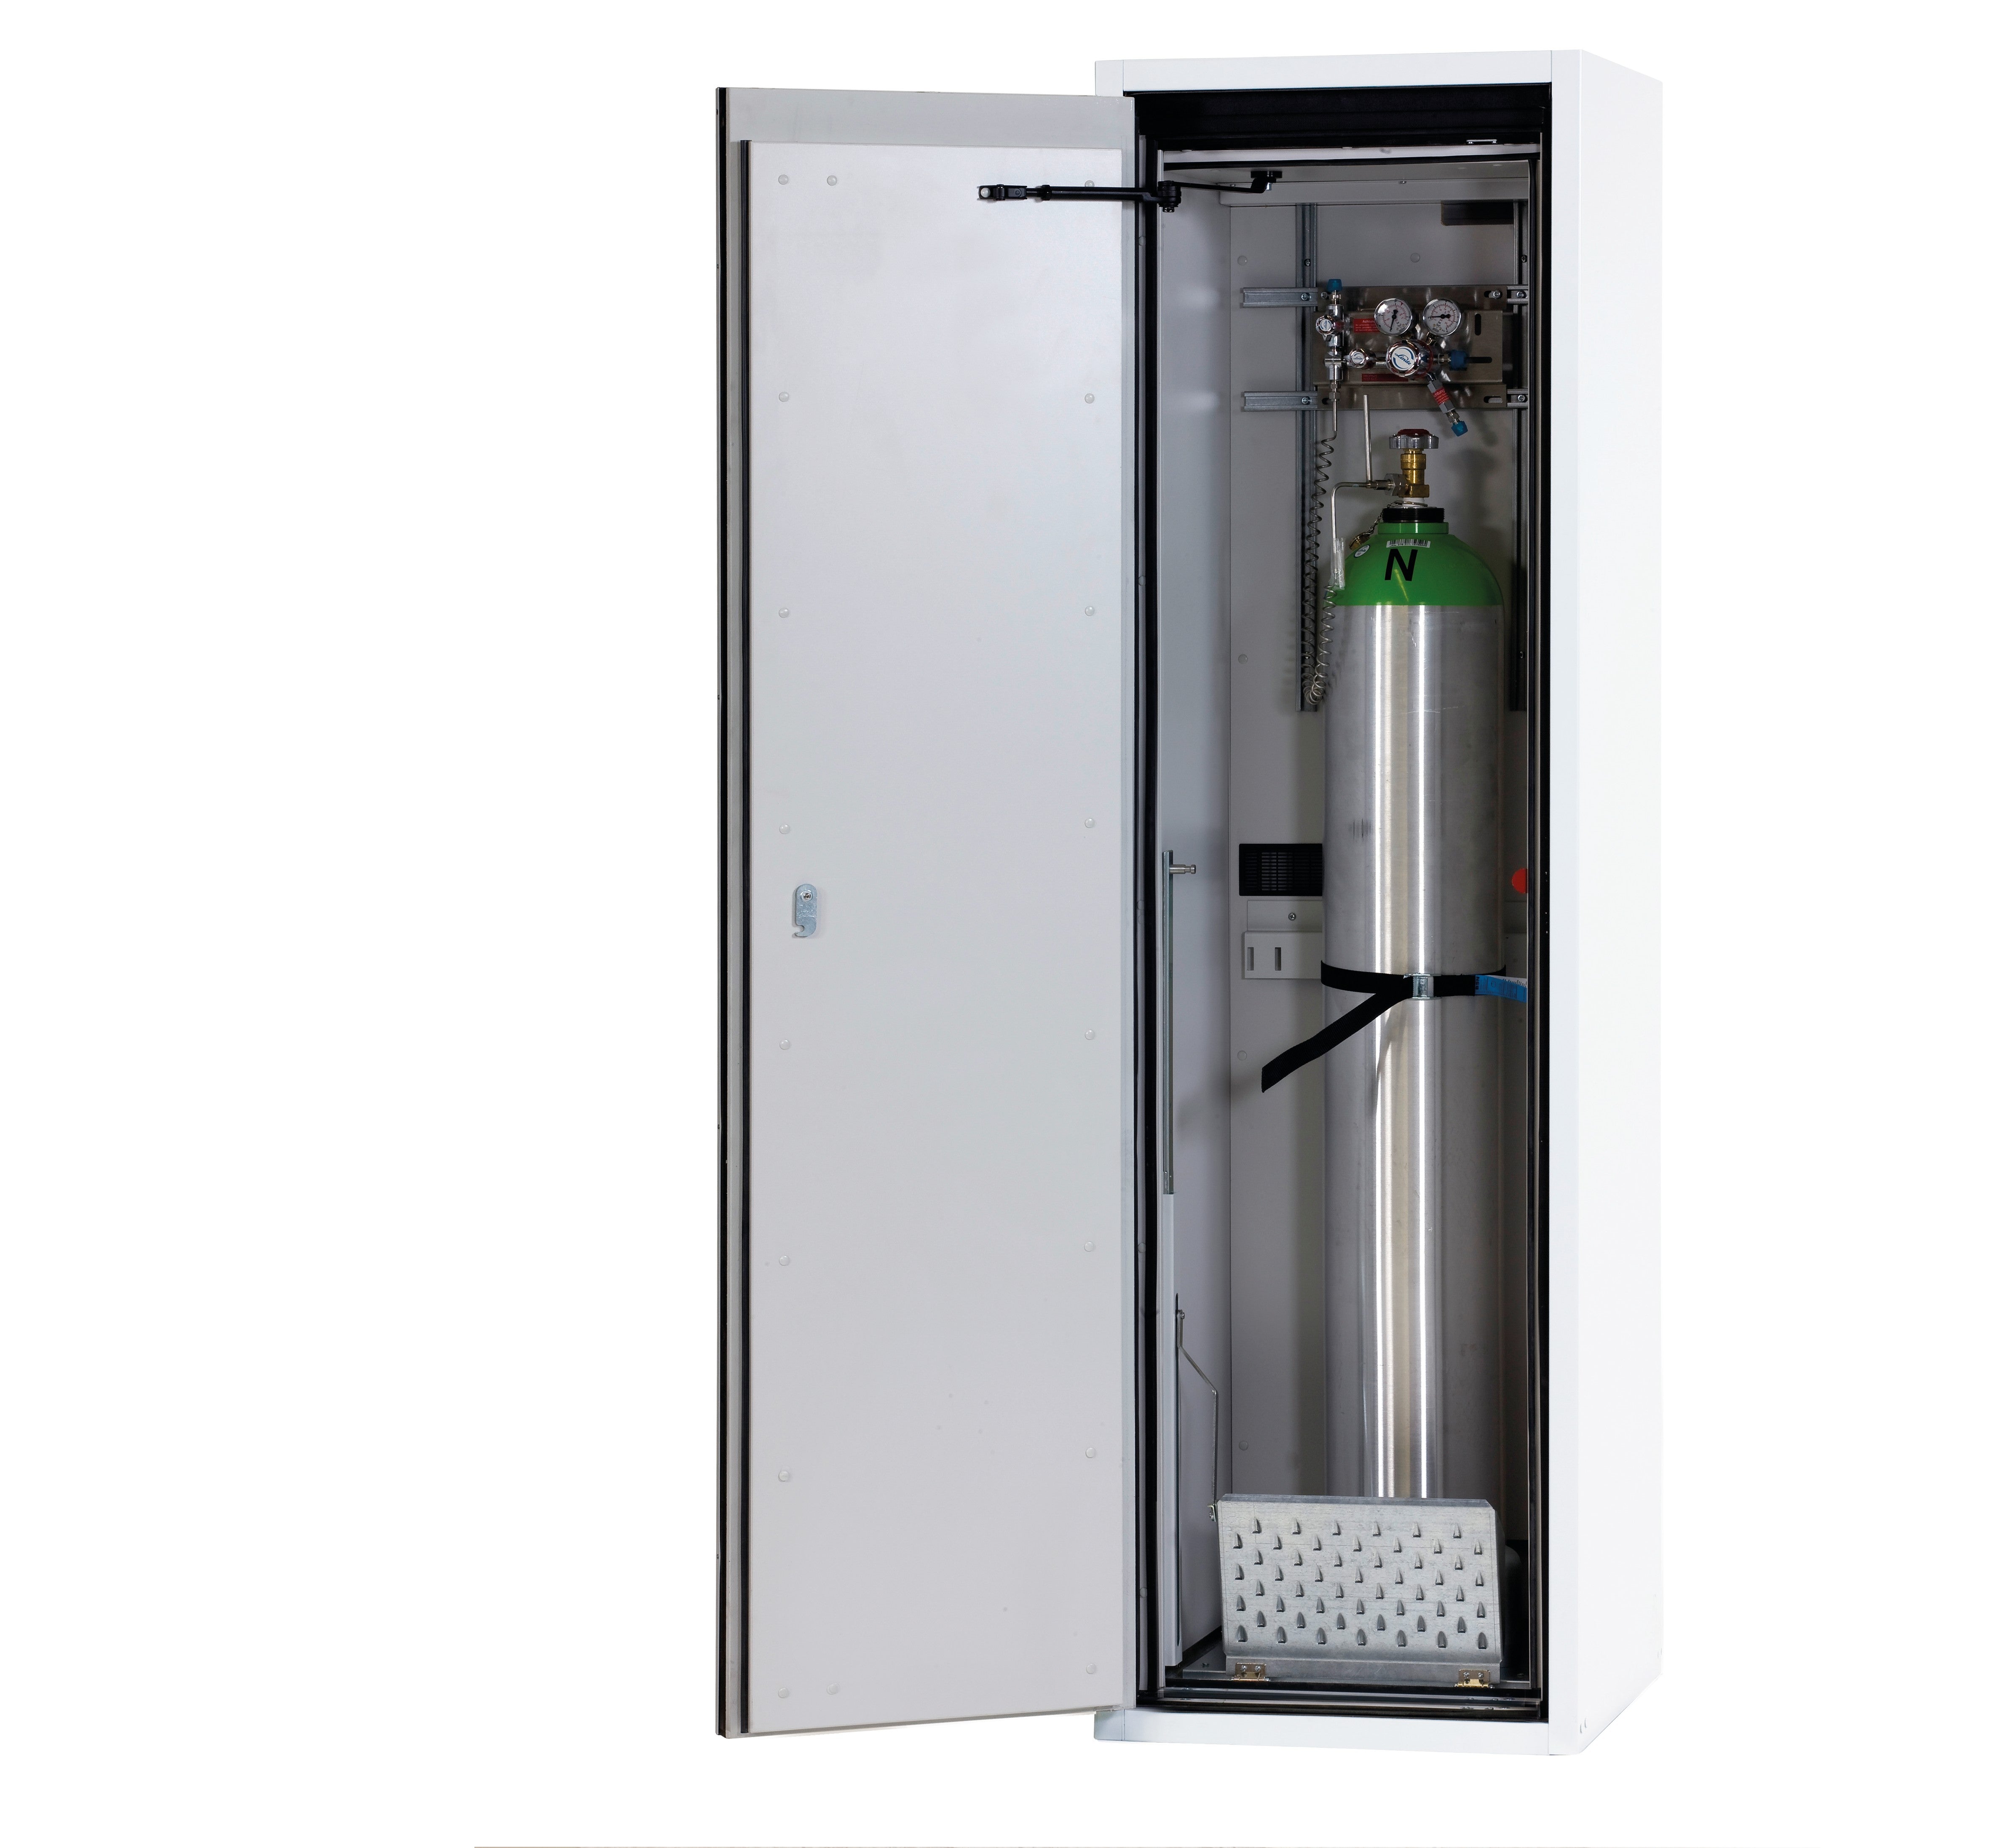 Type 90 compressed gas bottle cabinet G-ULTIMATE-90 model G90.205.060 in laboratory white (similar to RAL 9016) with comfortable interior fittings for 1x compressed gas bottles of 50 liters each